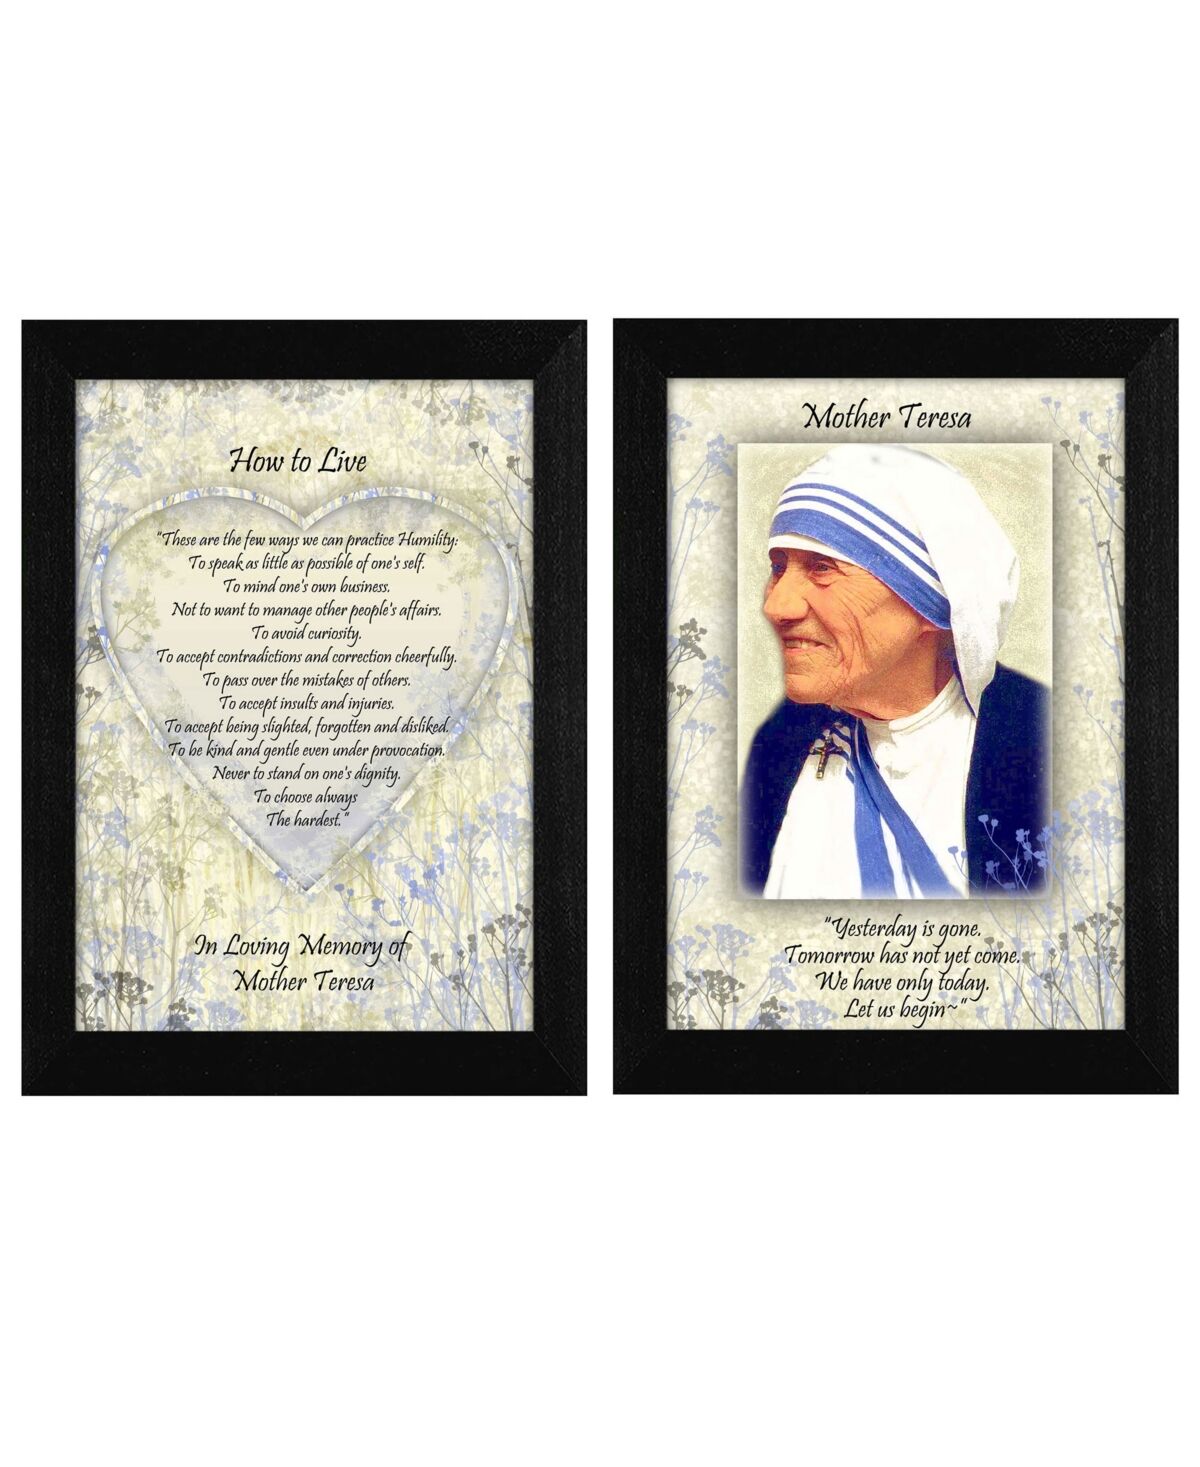 Trendy Decor 4U How To Live Quotes by Mother Teresa Collection, Printed Wall Art, Ready to hang, Black Frame, 10